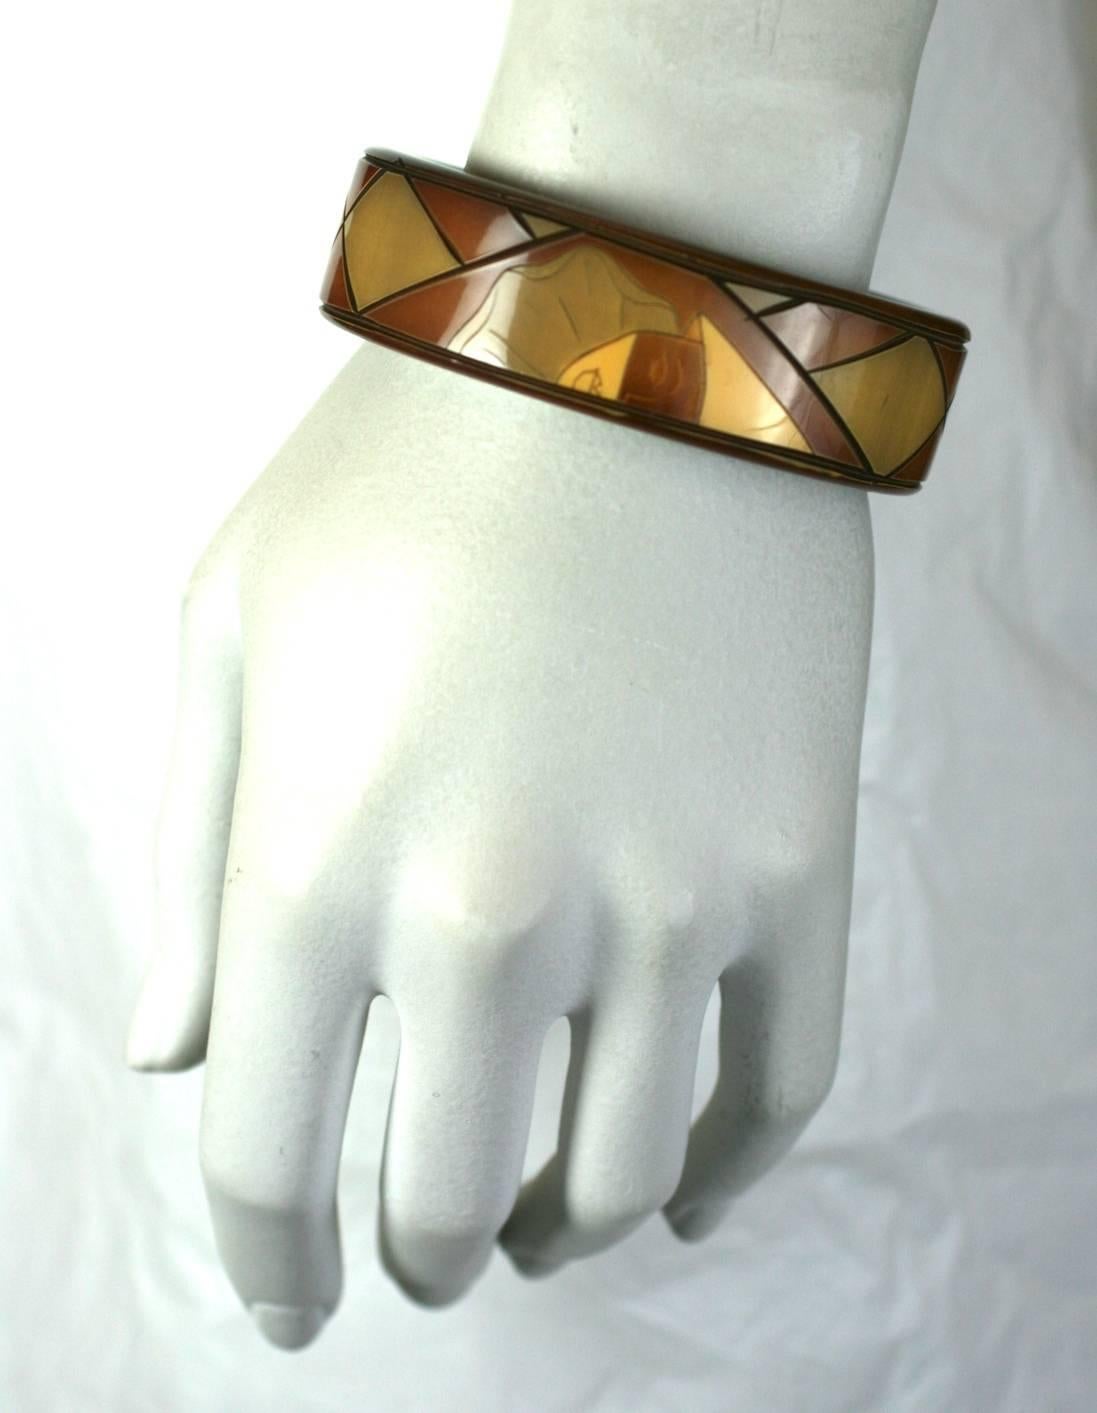 Pierrot Bakelite Bangle In Excellent Condition For Sale In New York, NY